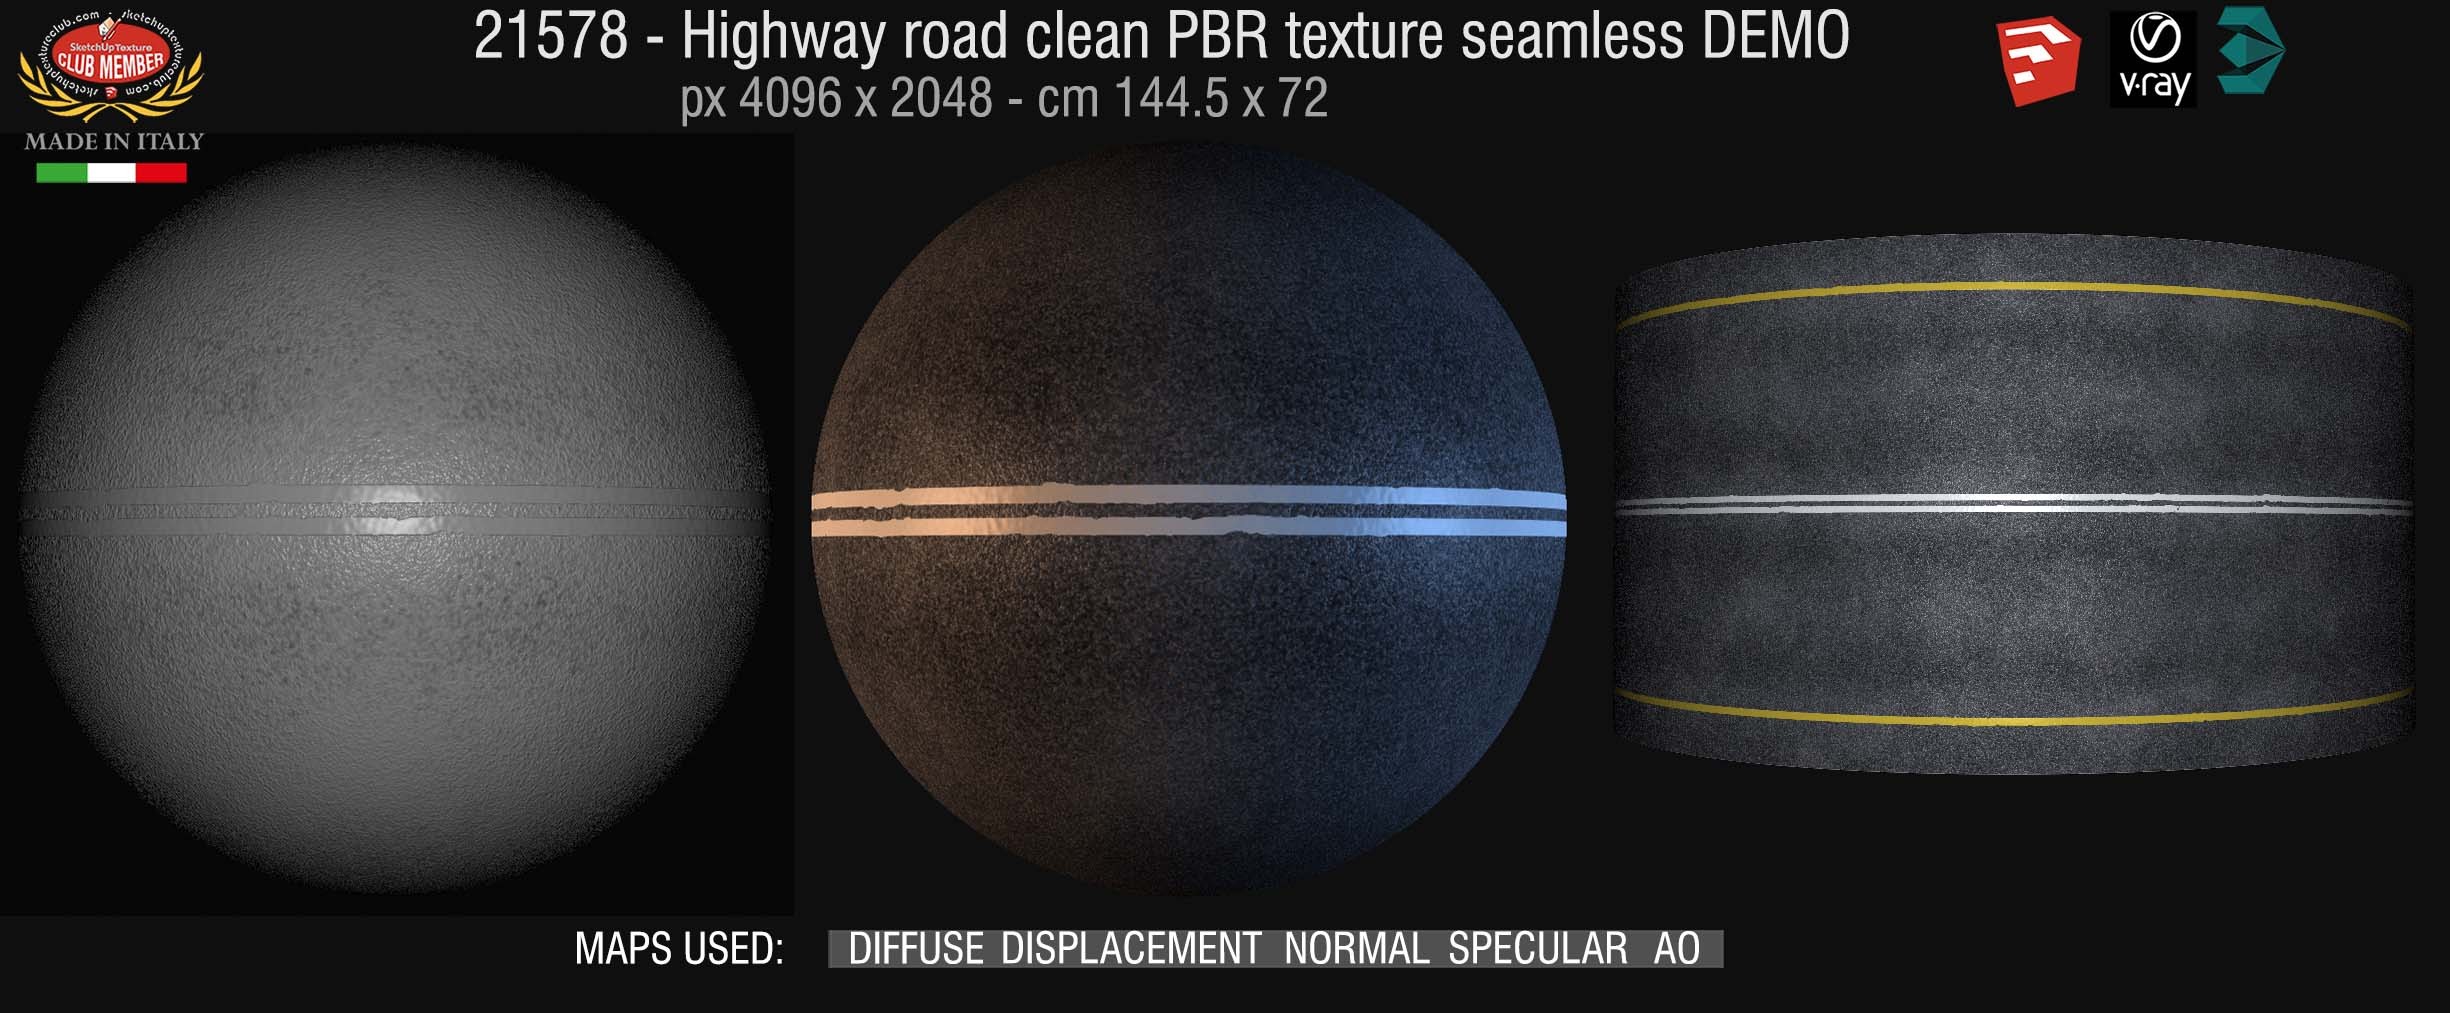 21578 Highway road clean PBR texture seamless DEMO